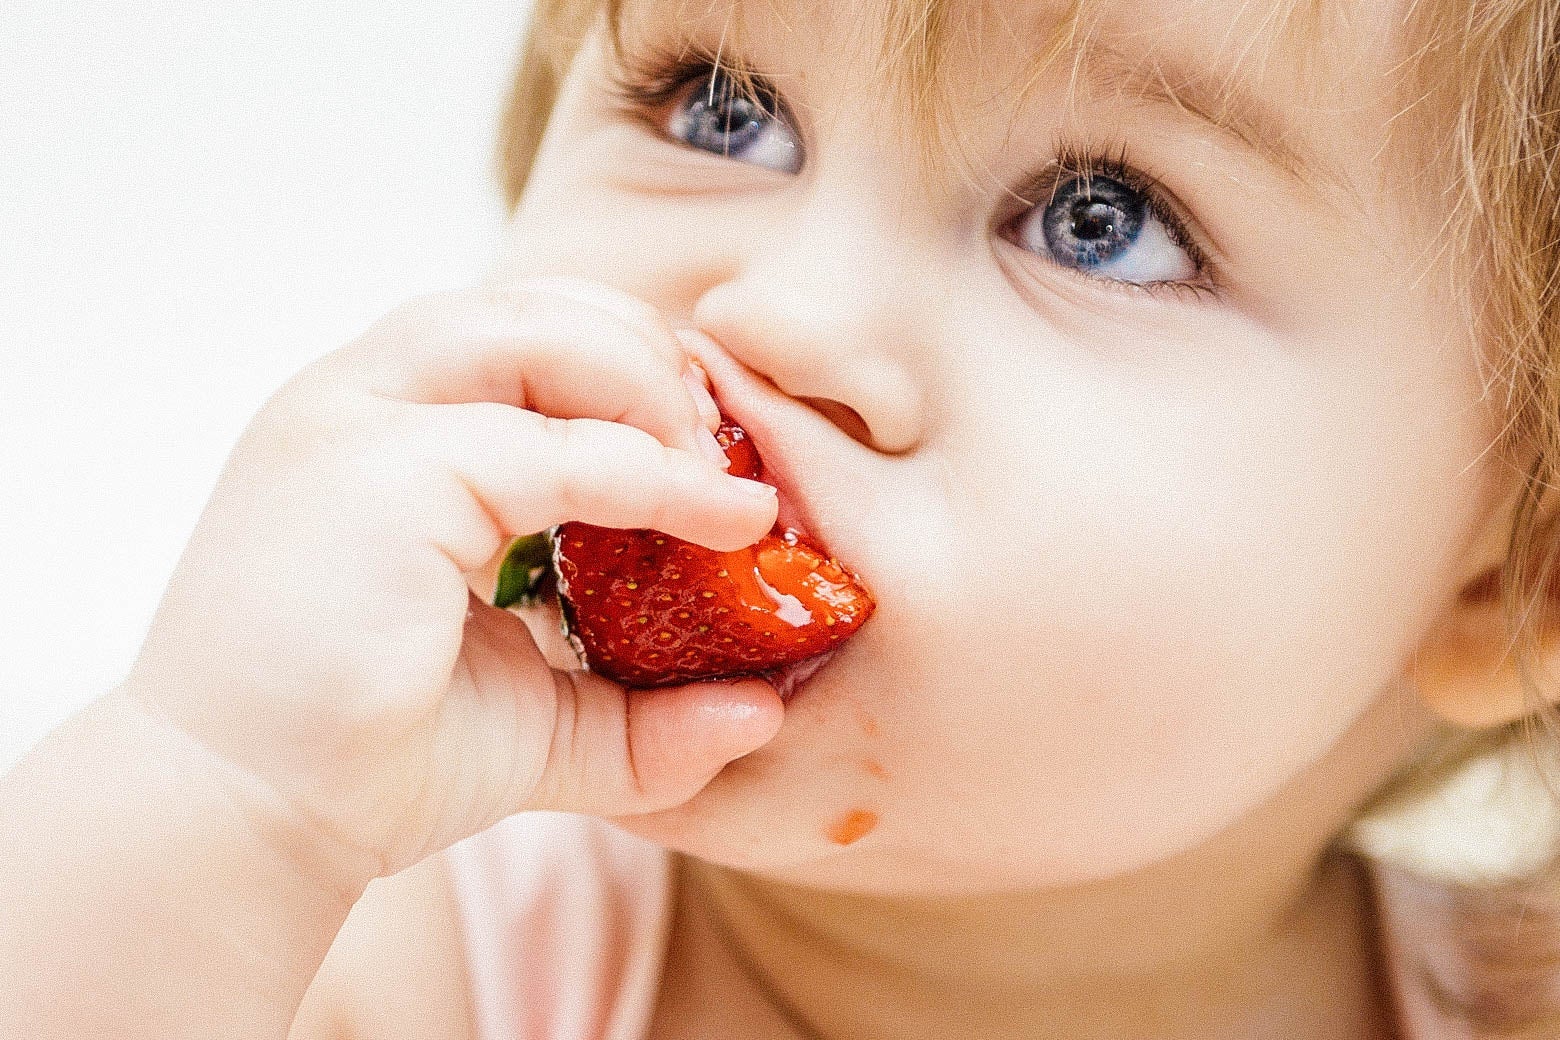 A toddler biting into a strawberry, making the juice dribble down their chin